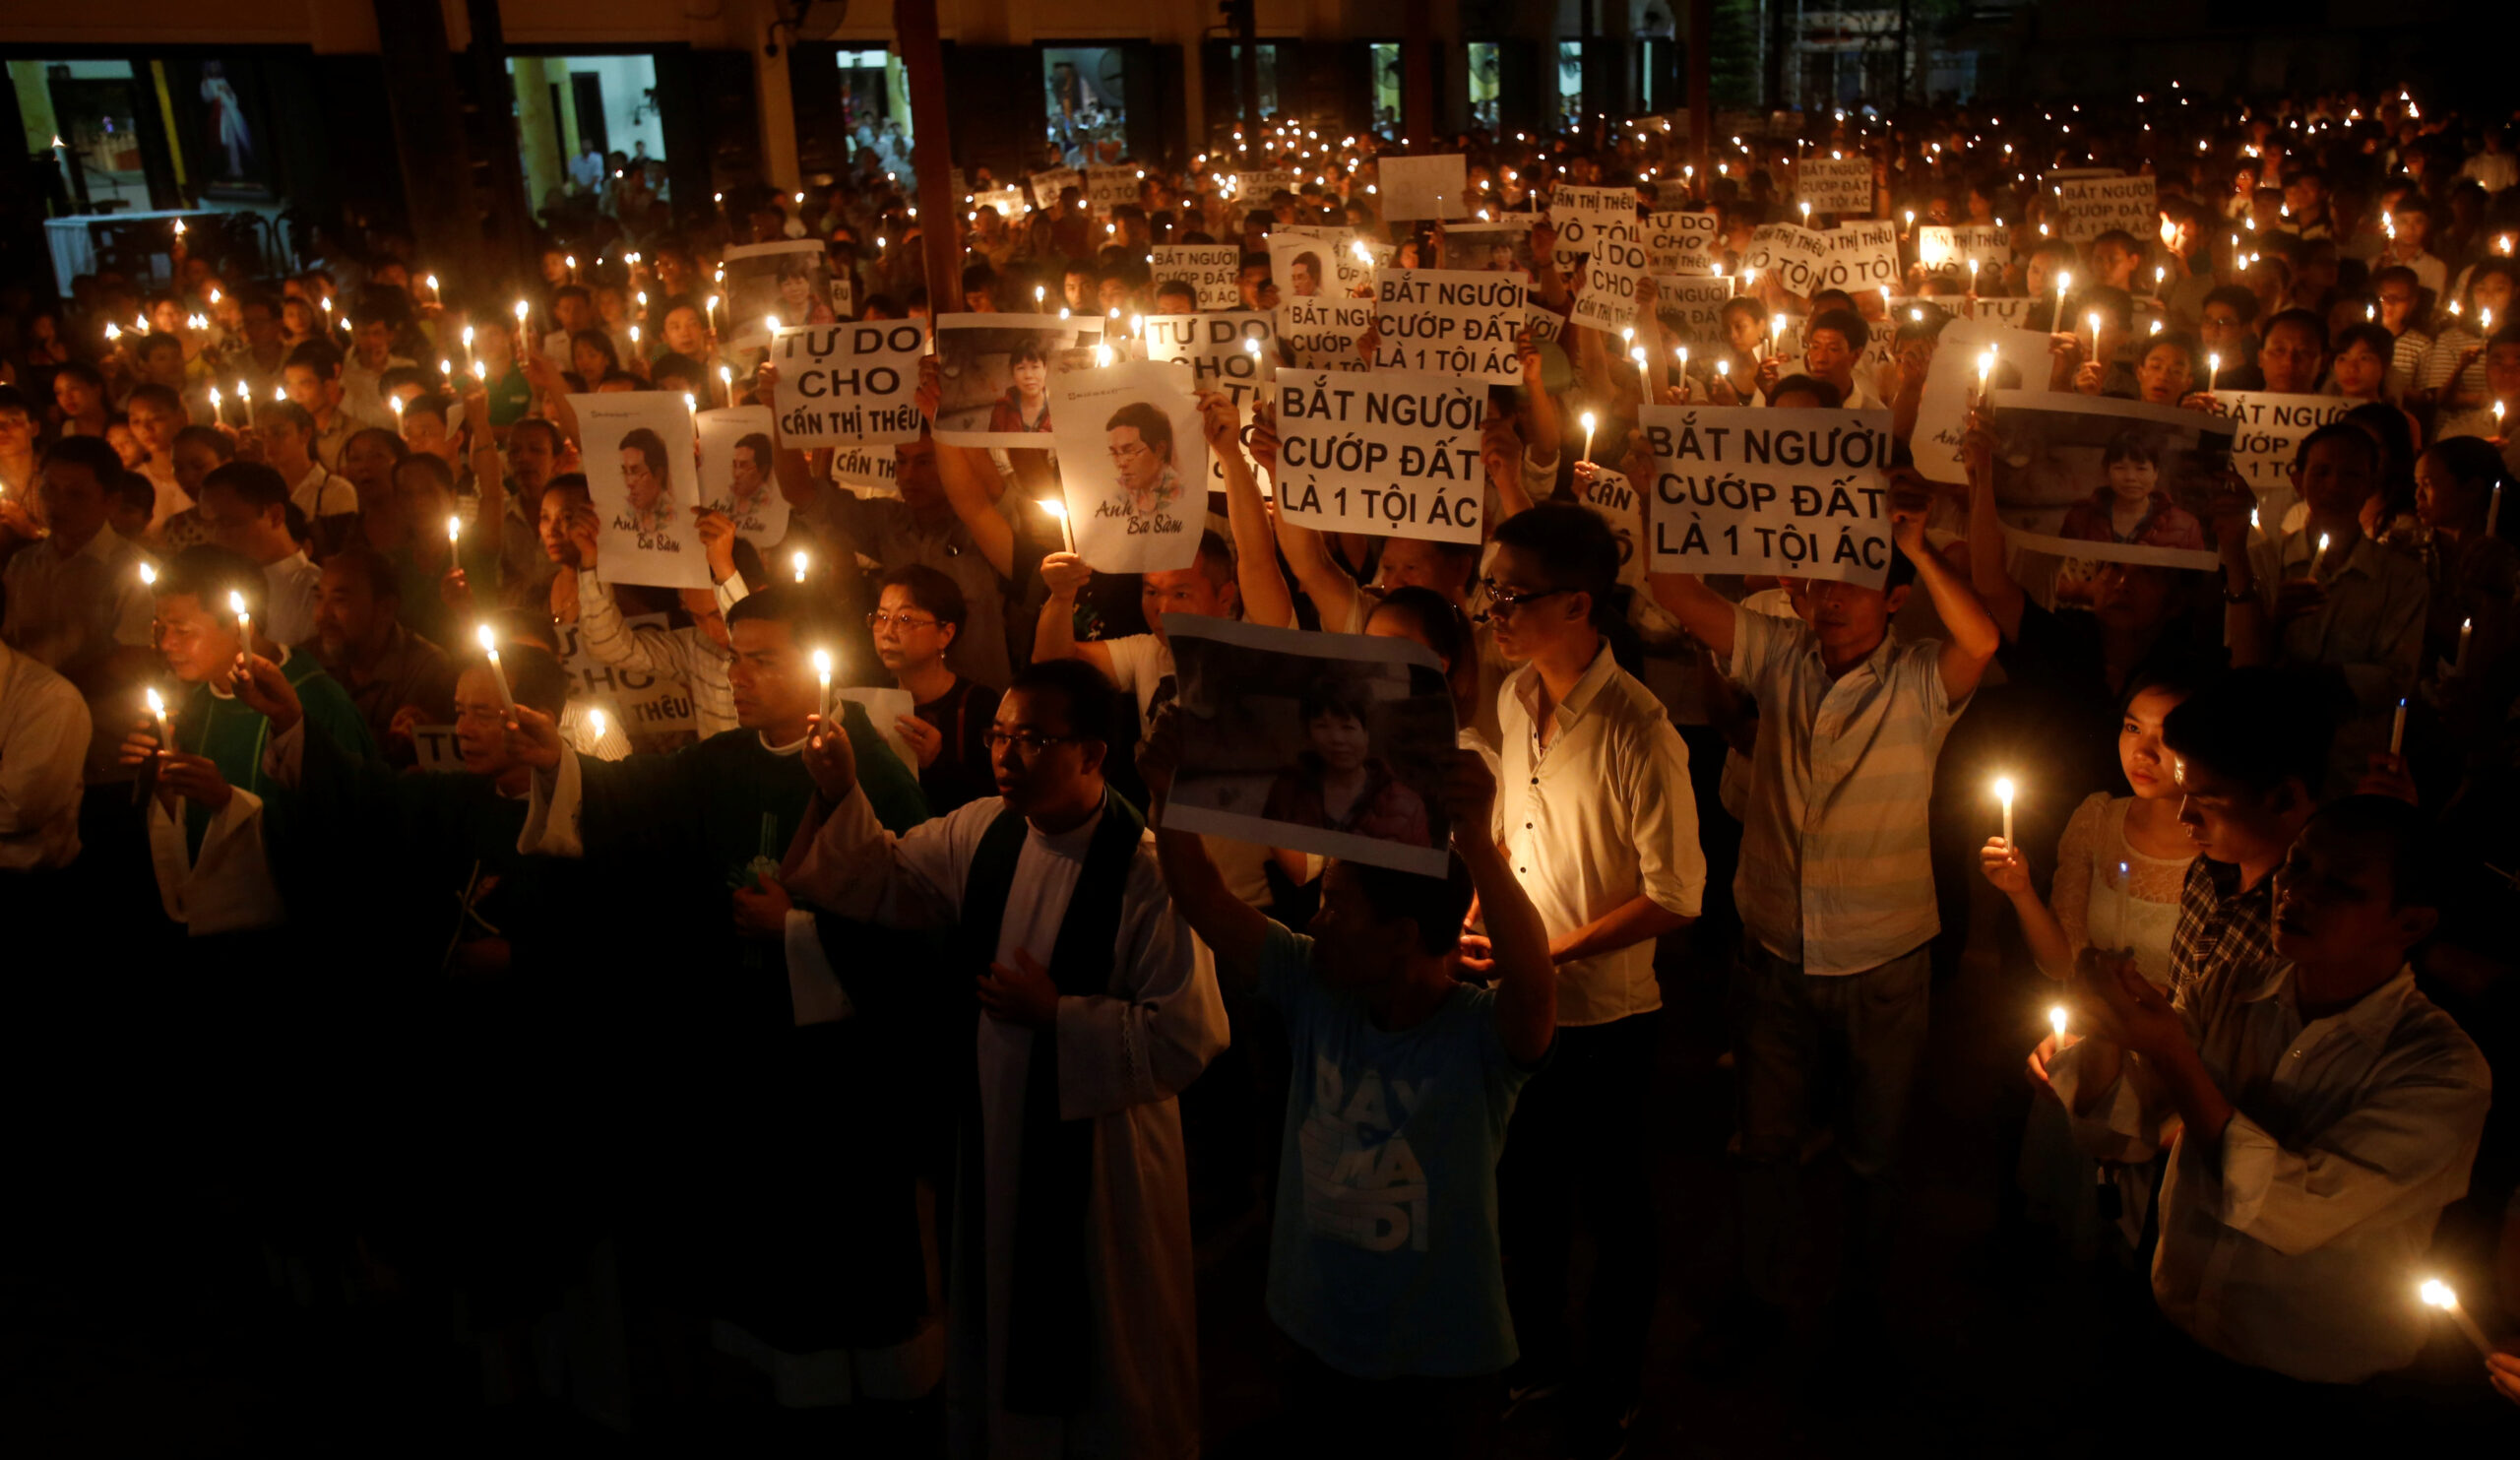 Vietnamese protesters hold images of dissident blogger Nguyen Huu Vinh and land protection activist Can Thi Theu during a mass prayer to call for justice in their trials at Thai Ha church in Hanoi